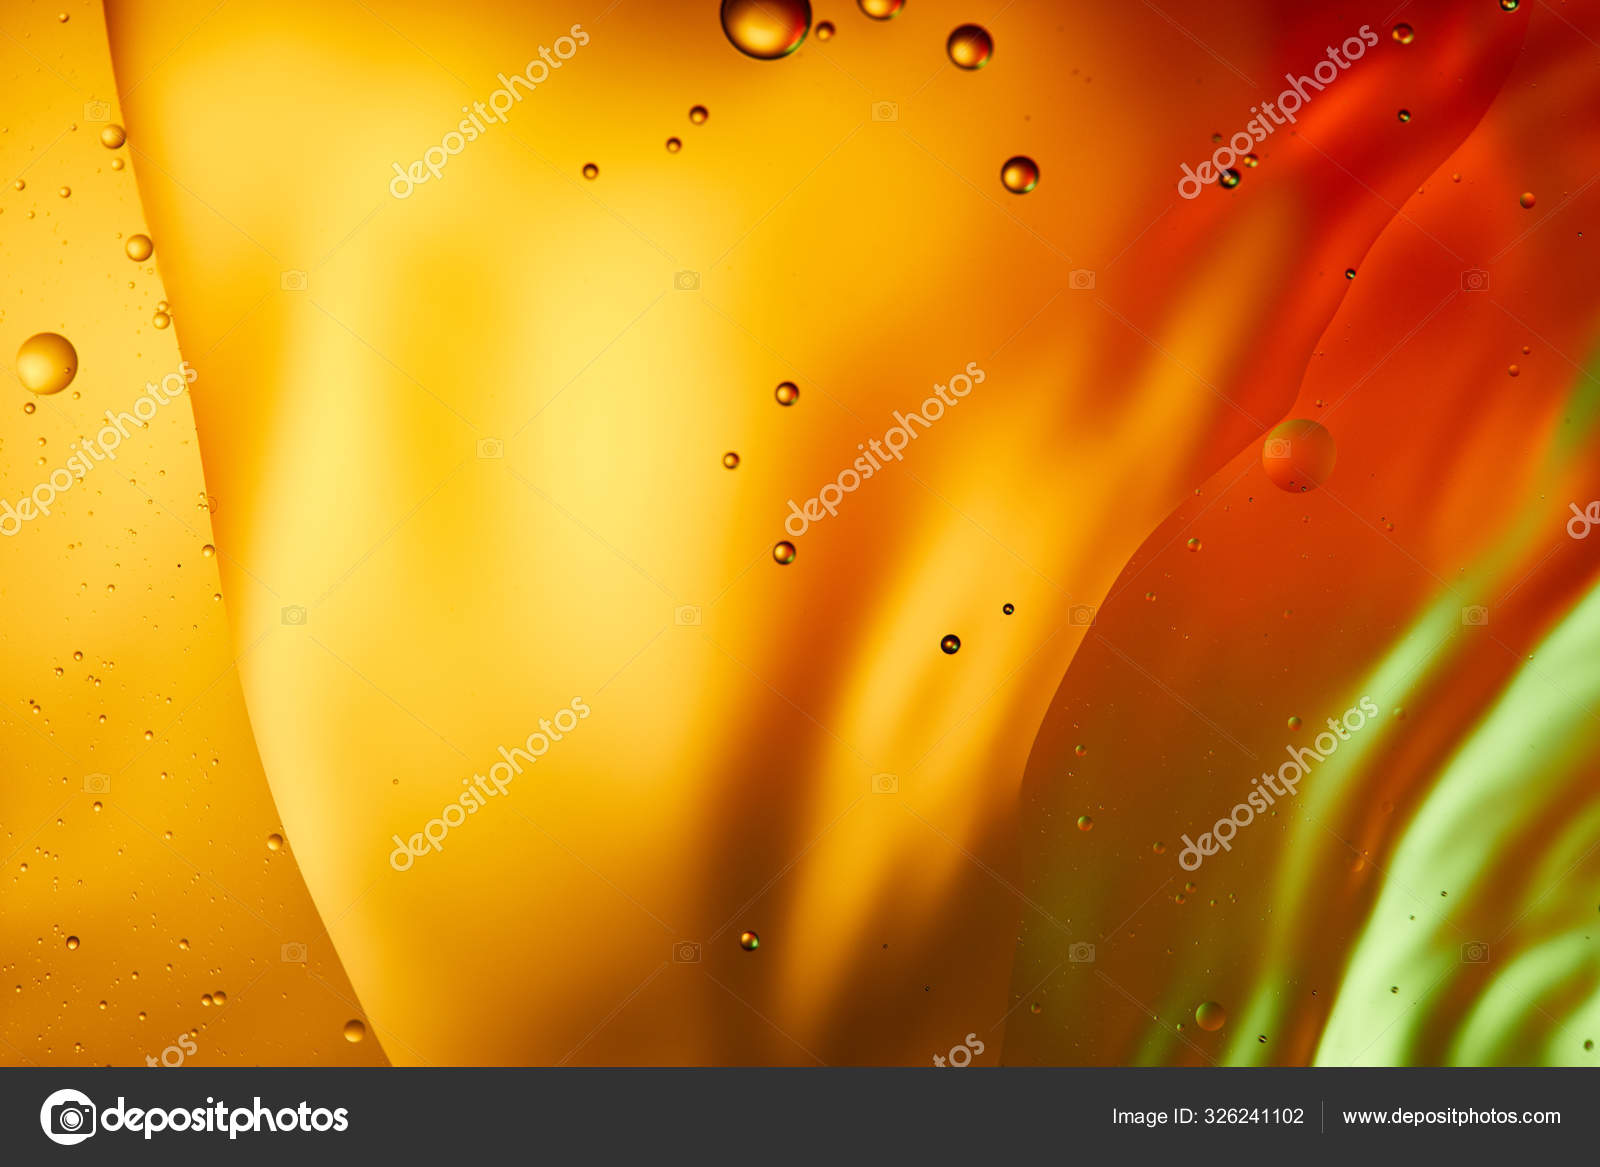 Abstract Orange Red Green Color Background Mixed Water Oil Stock Photo by  ©AntonMatyukha 326241102